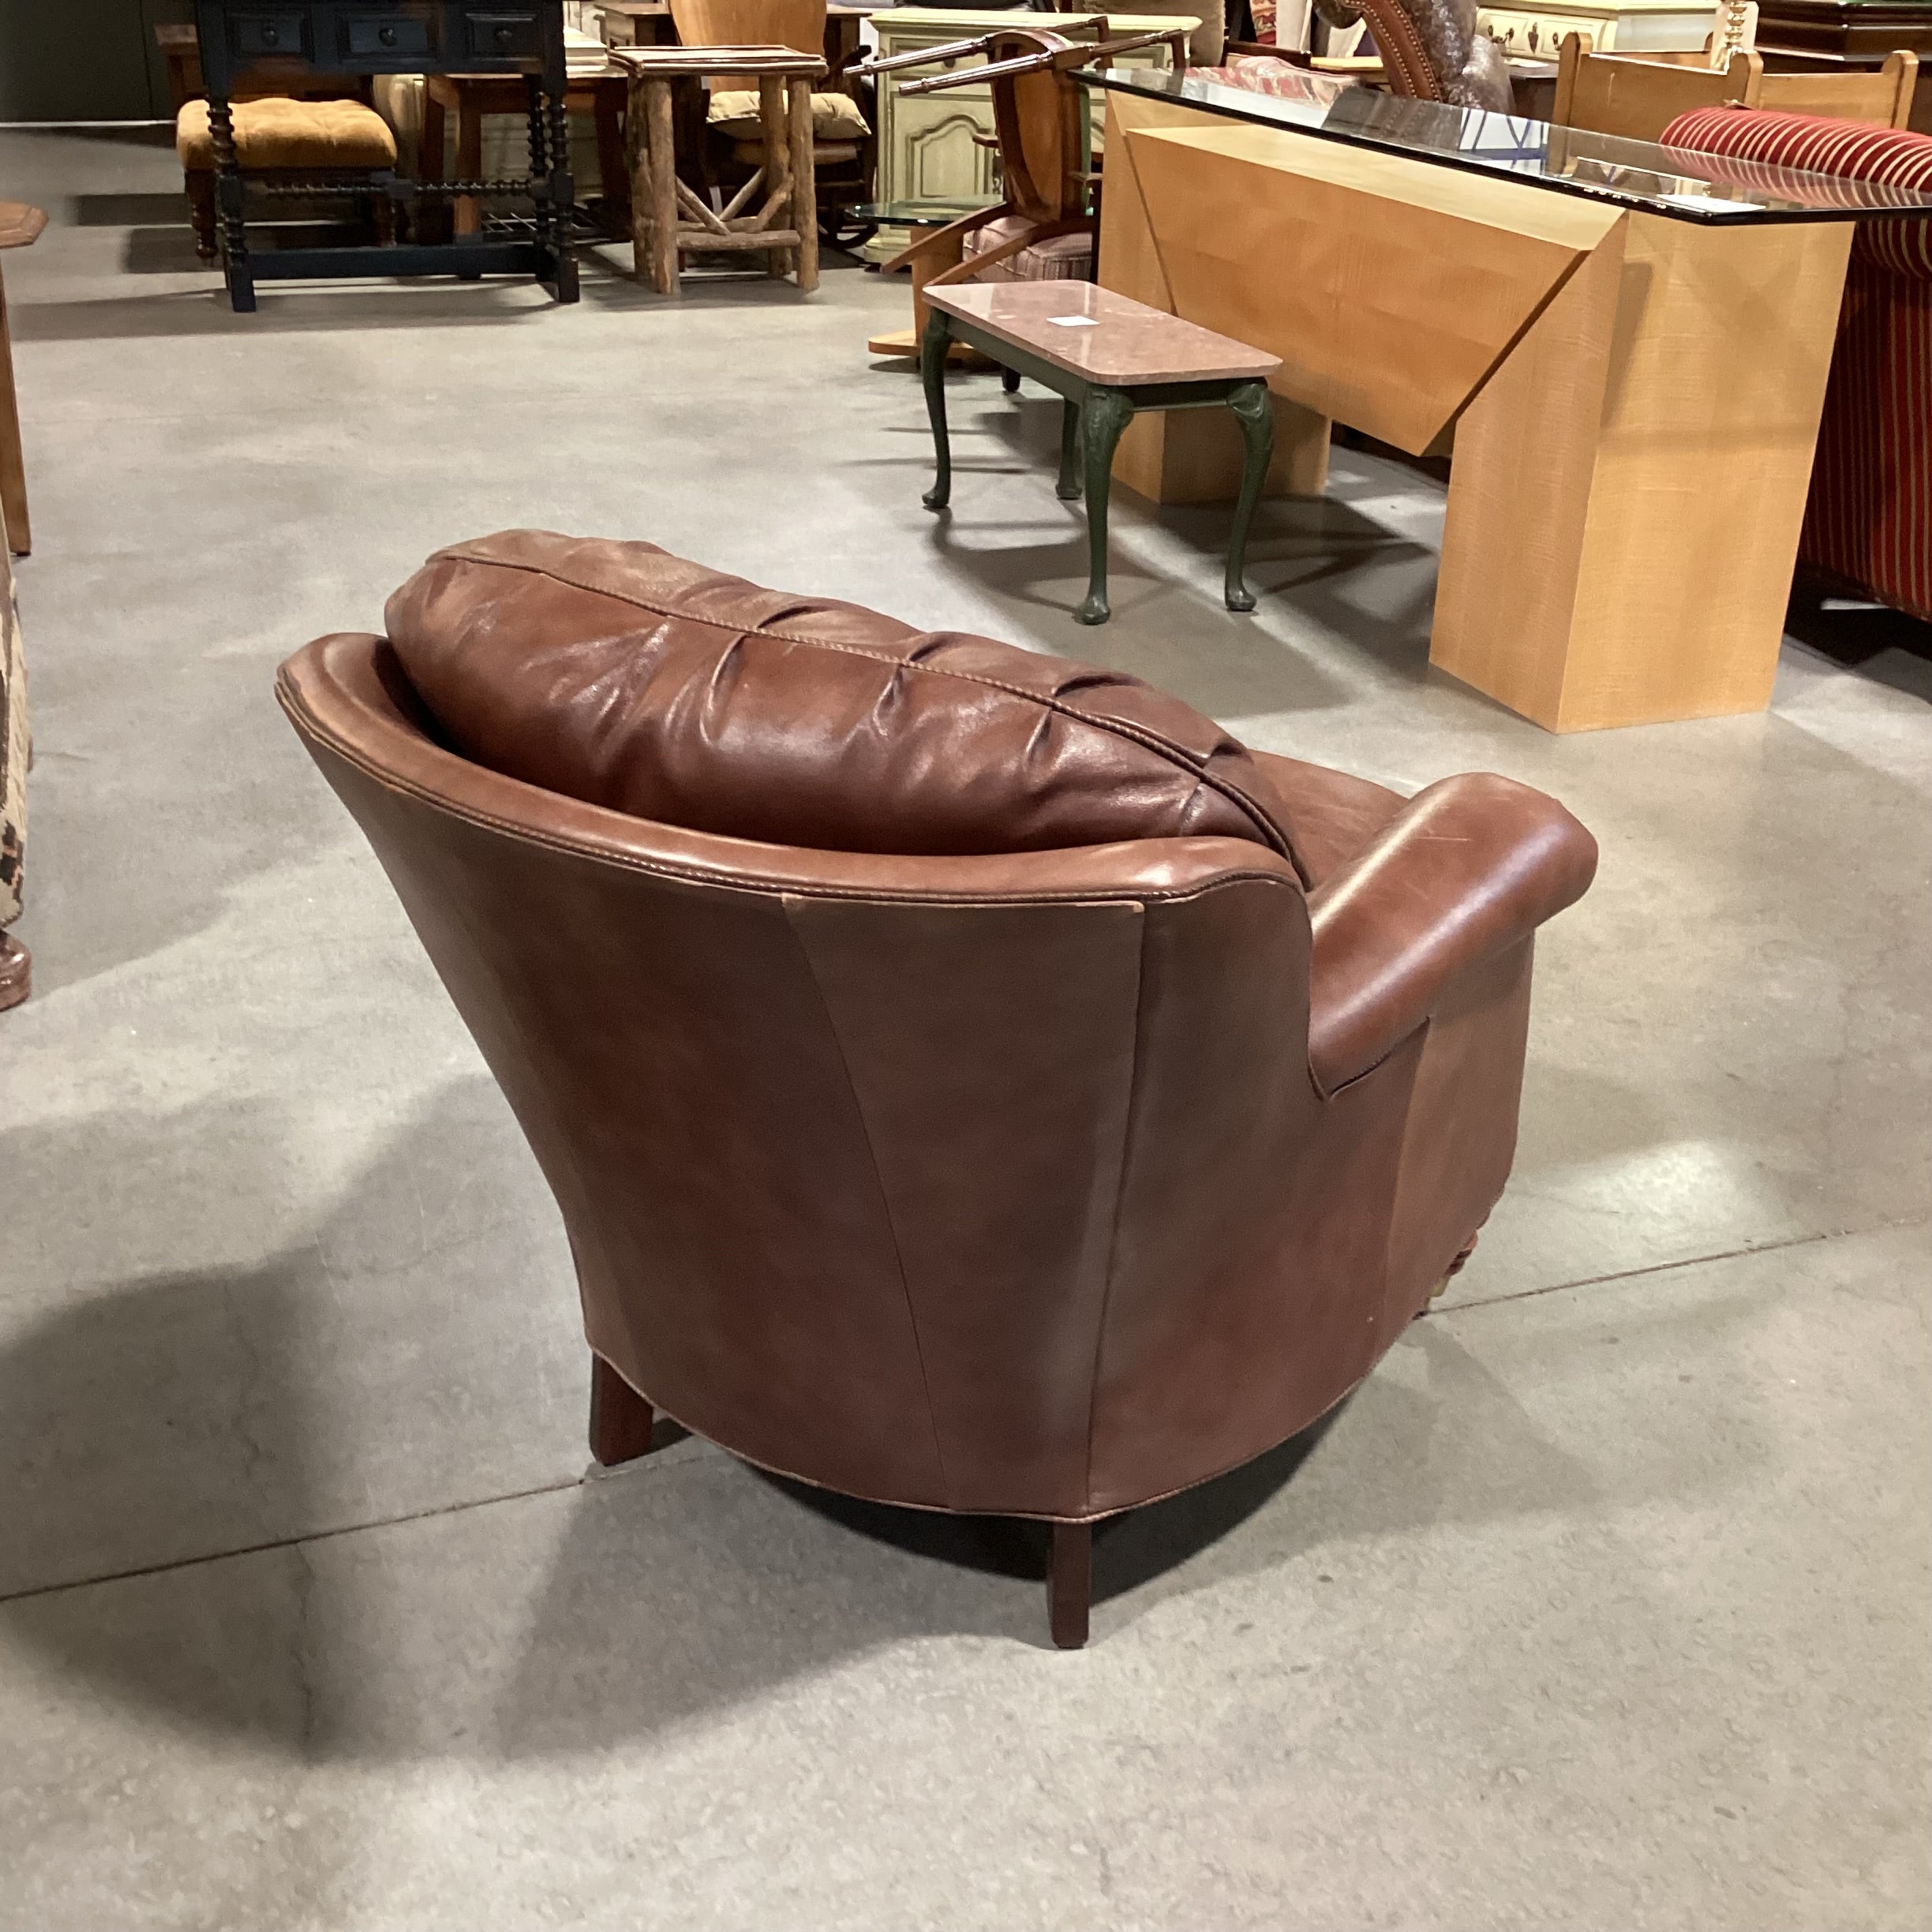 Cibola Furniture Brown Leather Front Casters Chair 36"x 28"x 30"